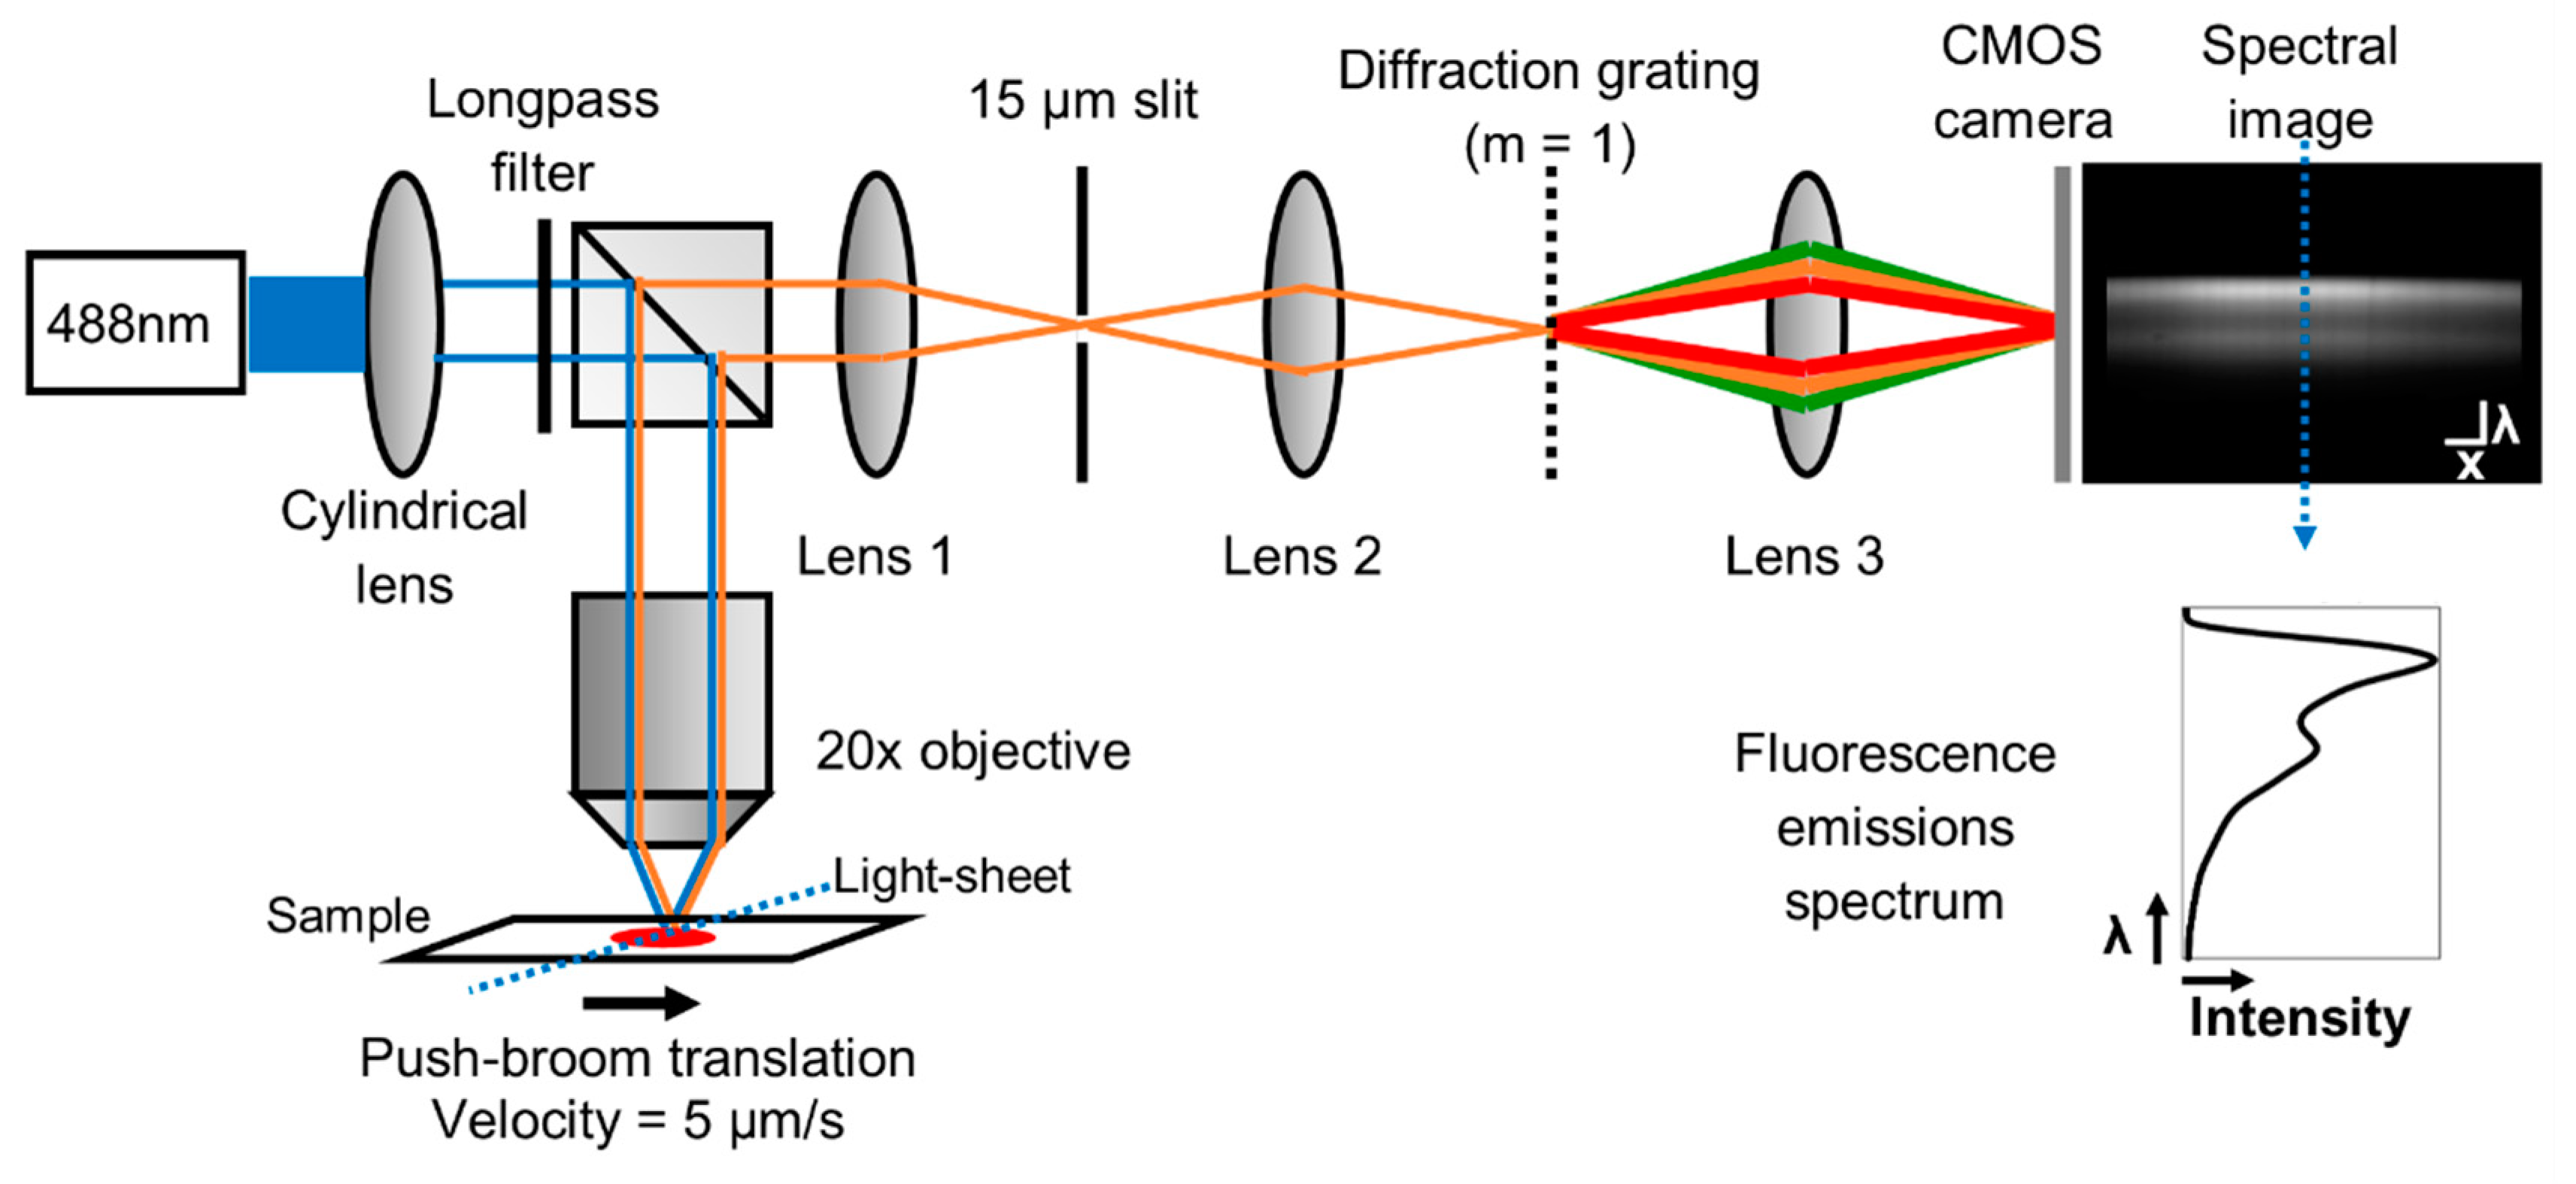 A simple spectroscope: the grating and slit are evidenced